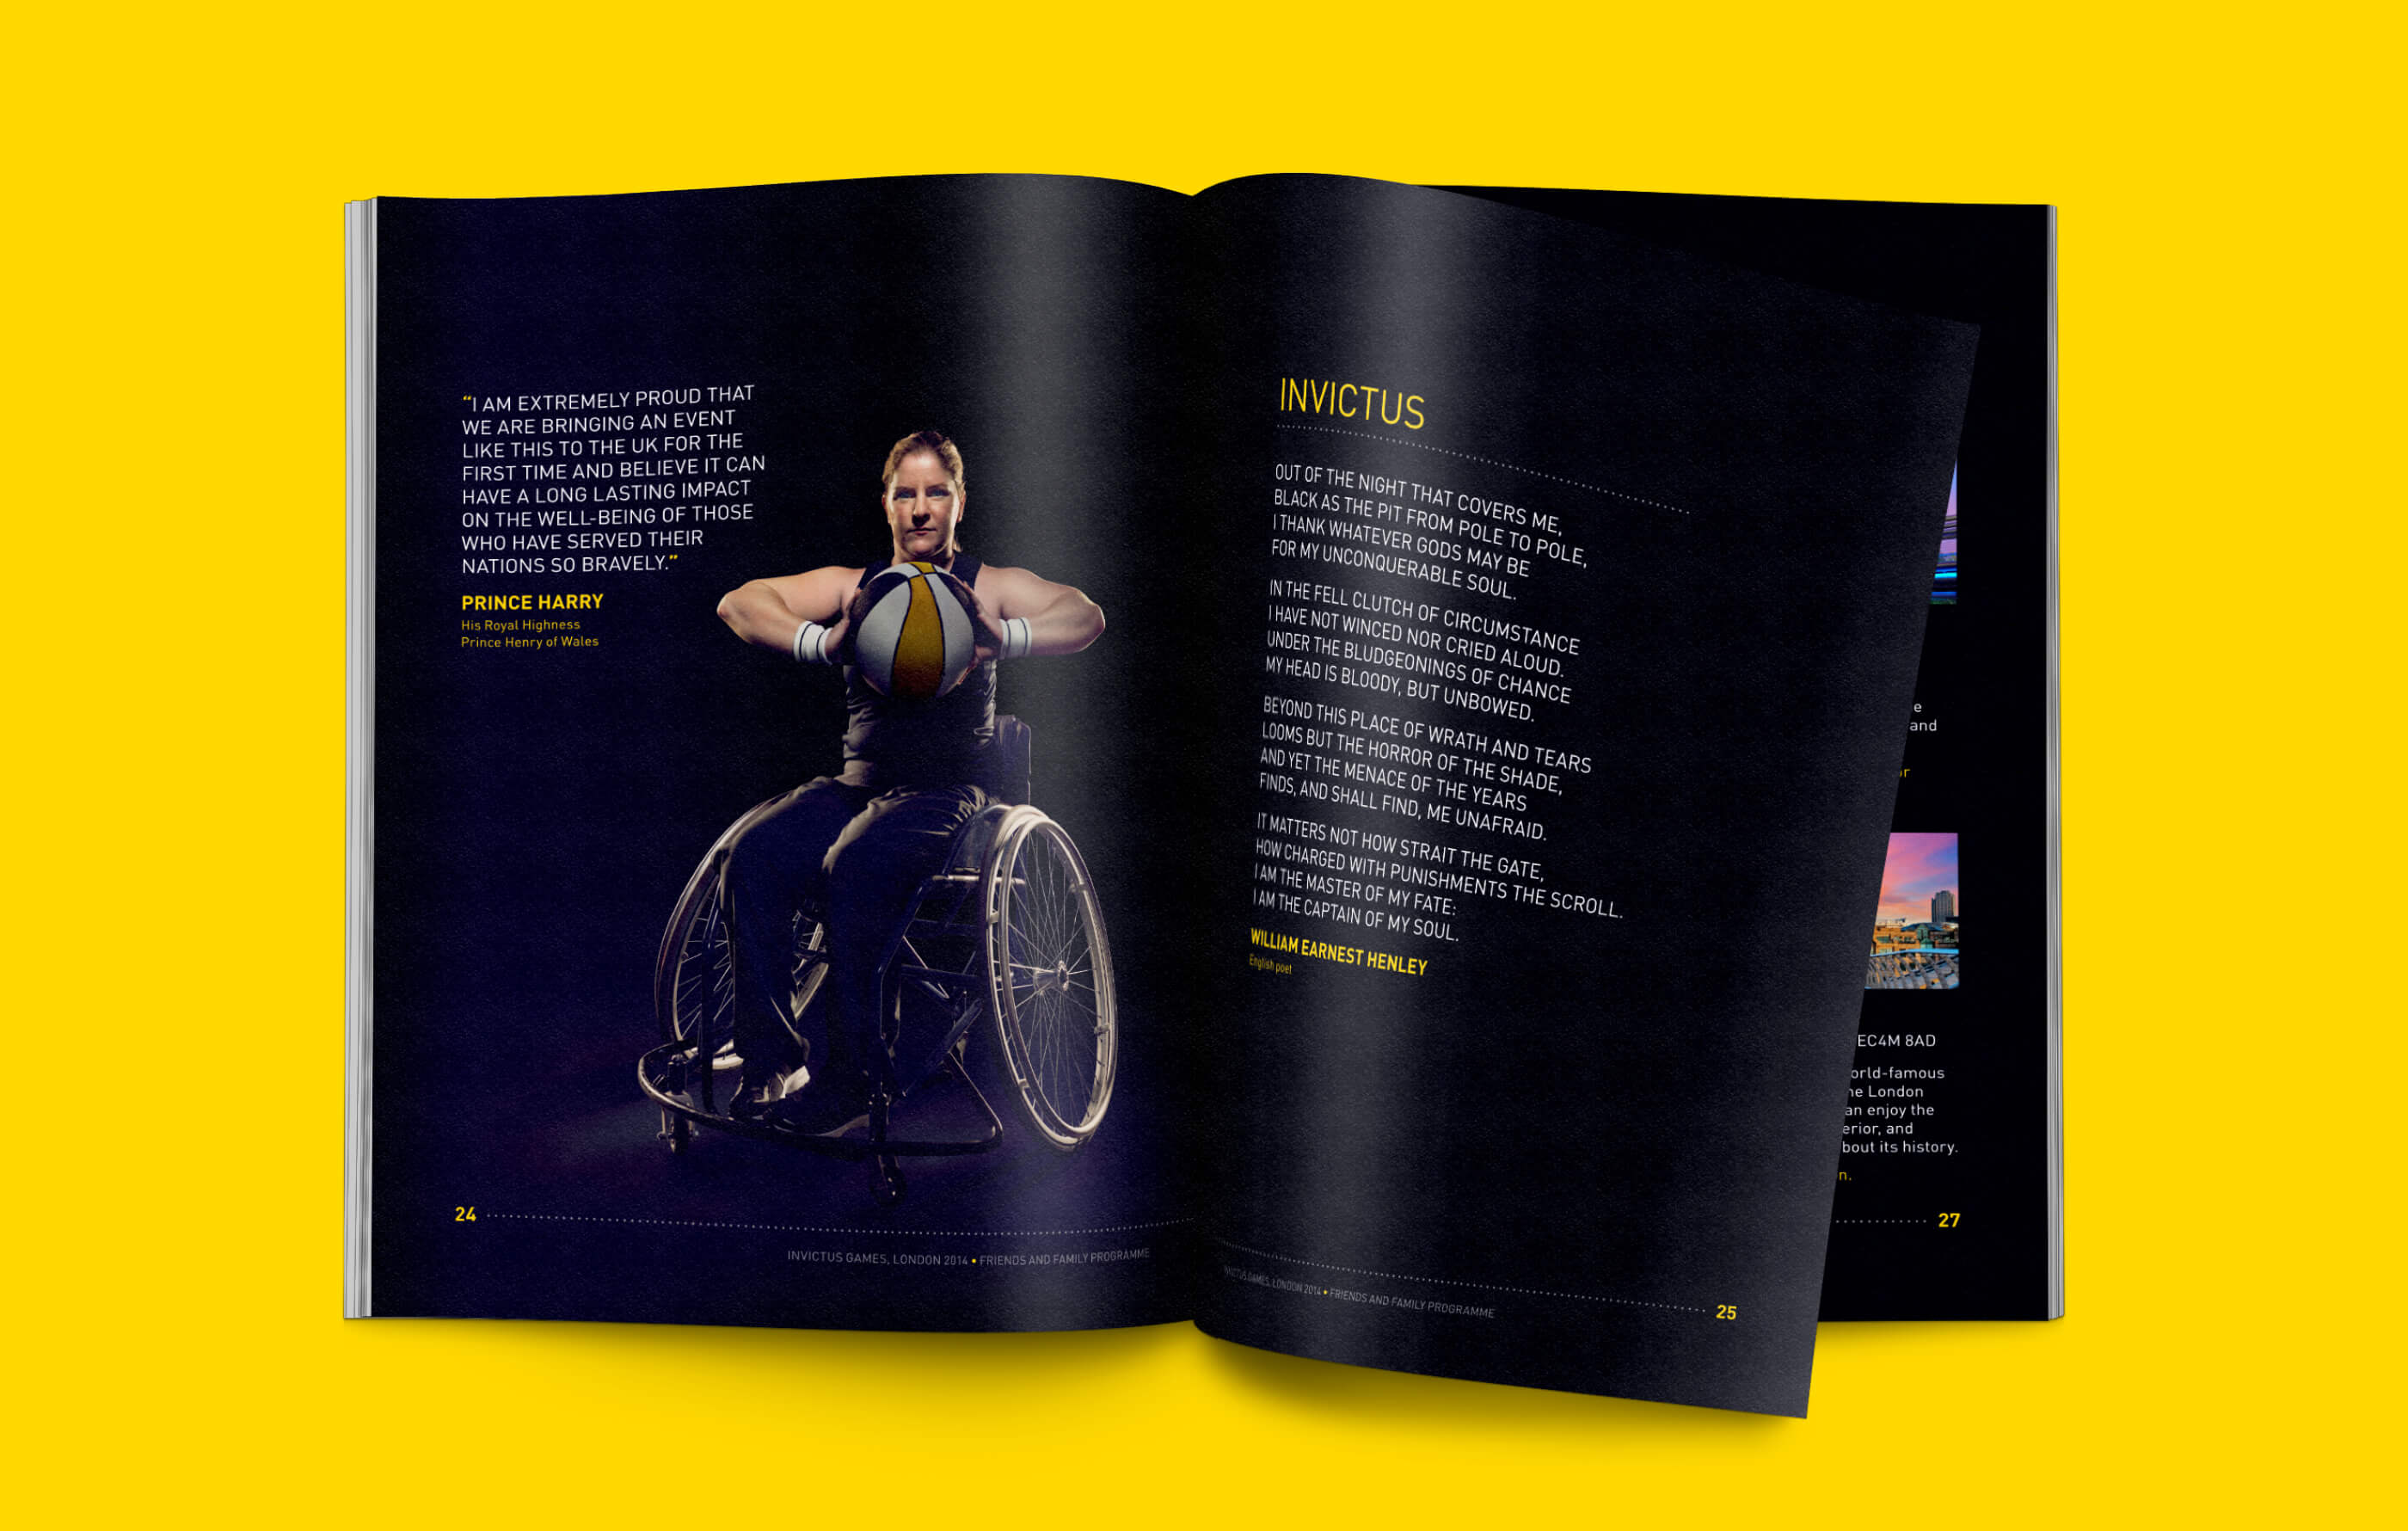 Spread of the printed booklet, featuring an image of a female wheelchair rugby player on the left page and inspirational quote from William Ernest Henley, an English poet, on the right